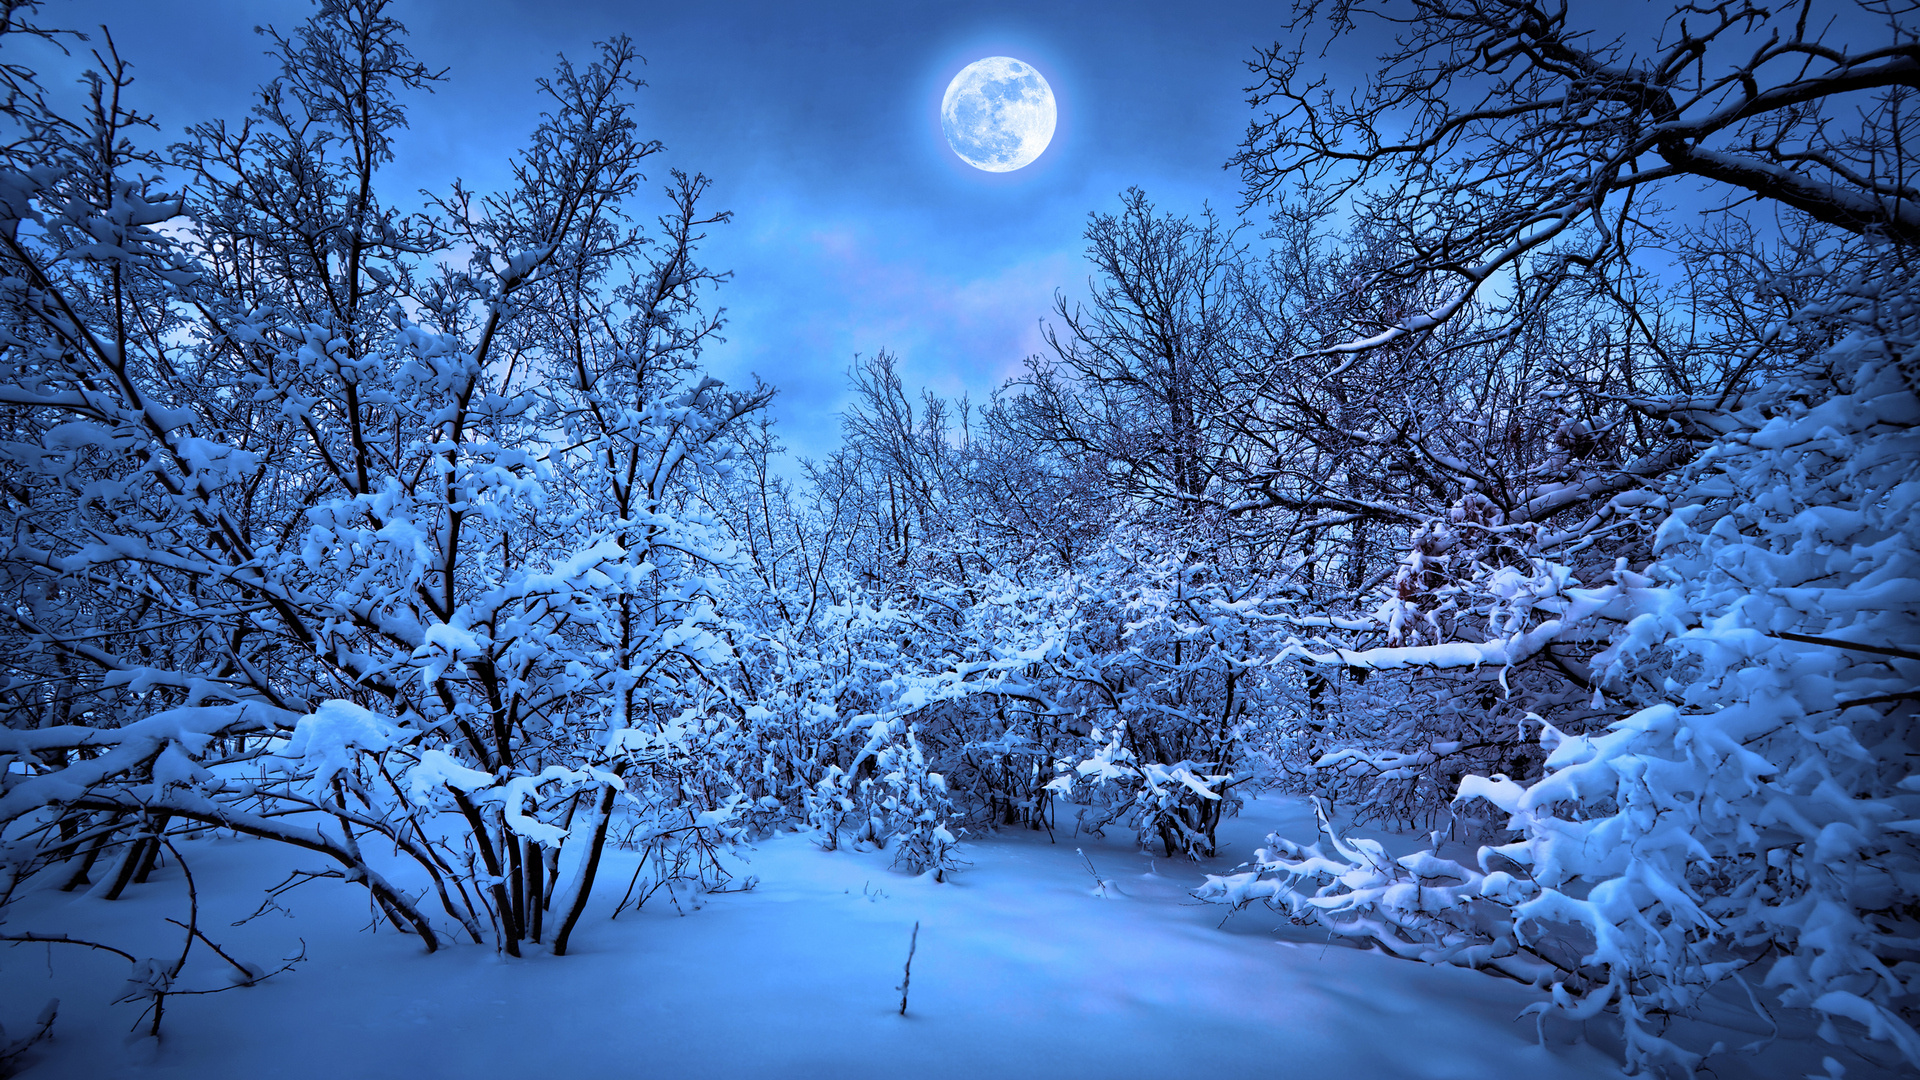 Winter Anime Forest Wallpapers - Wallpaper Cave